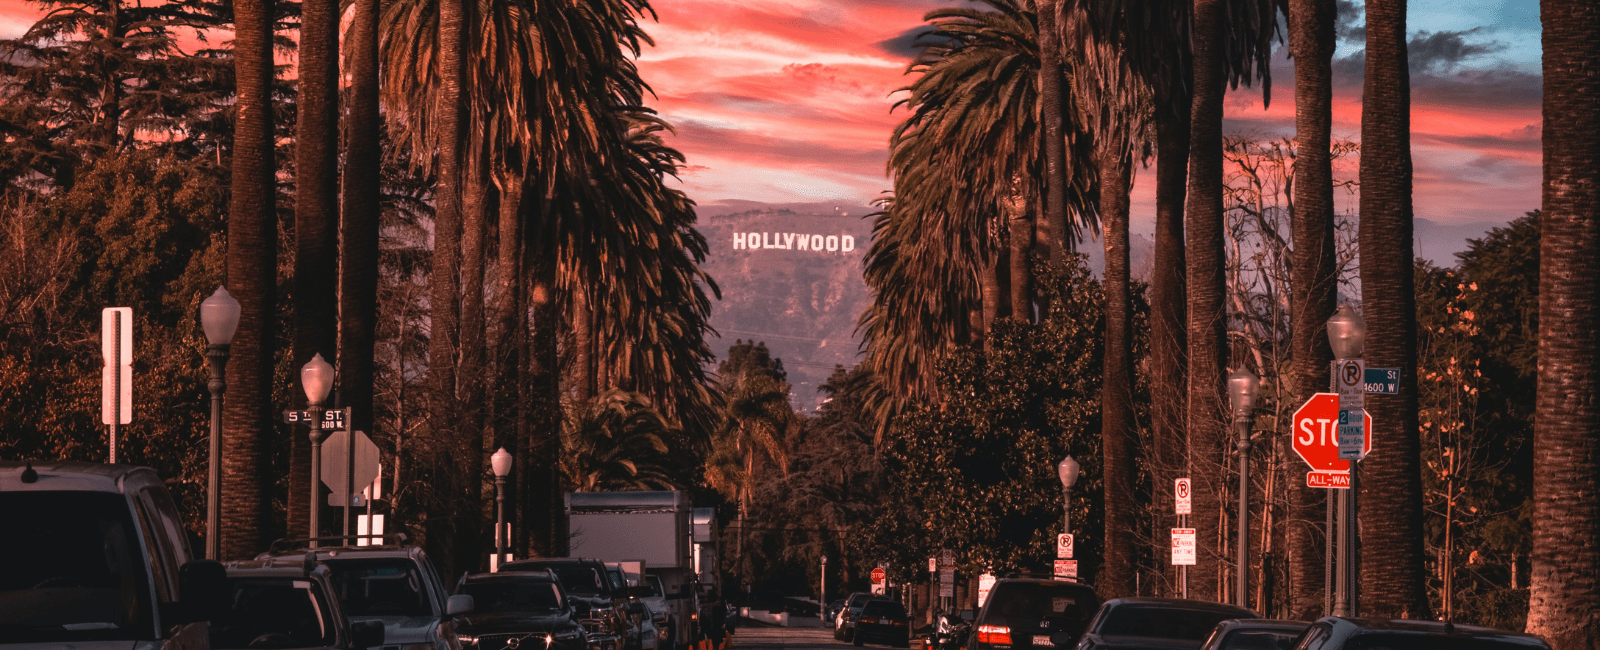 Hollywood Sign during Sunset